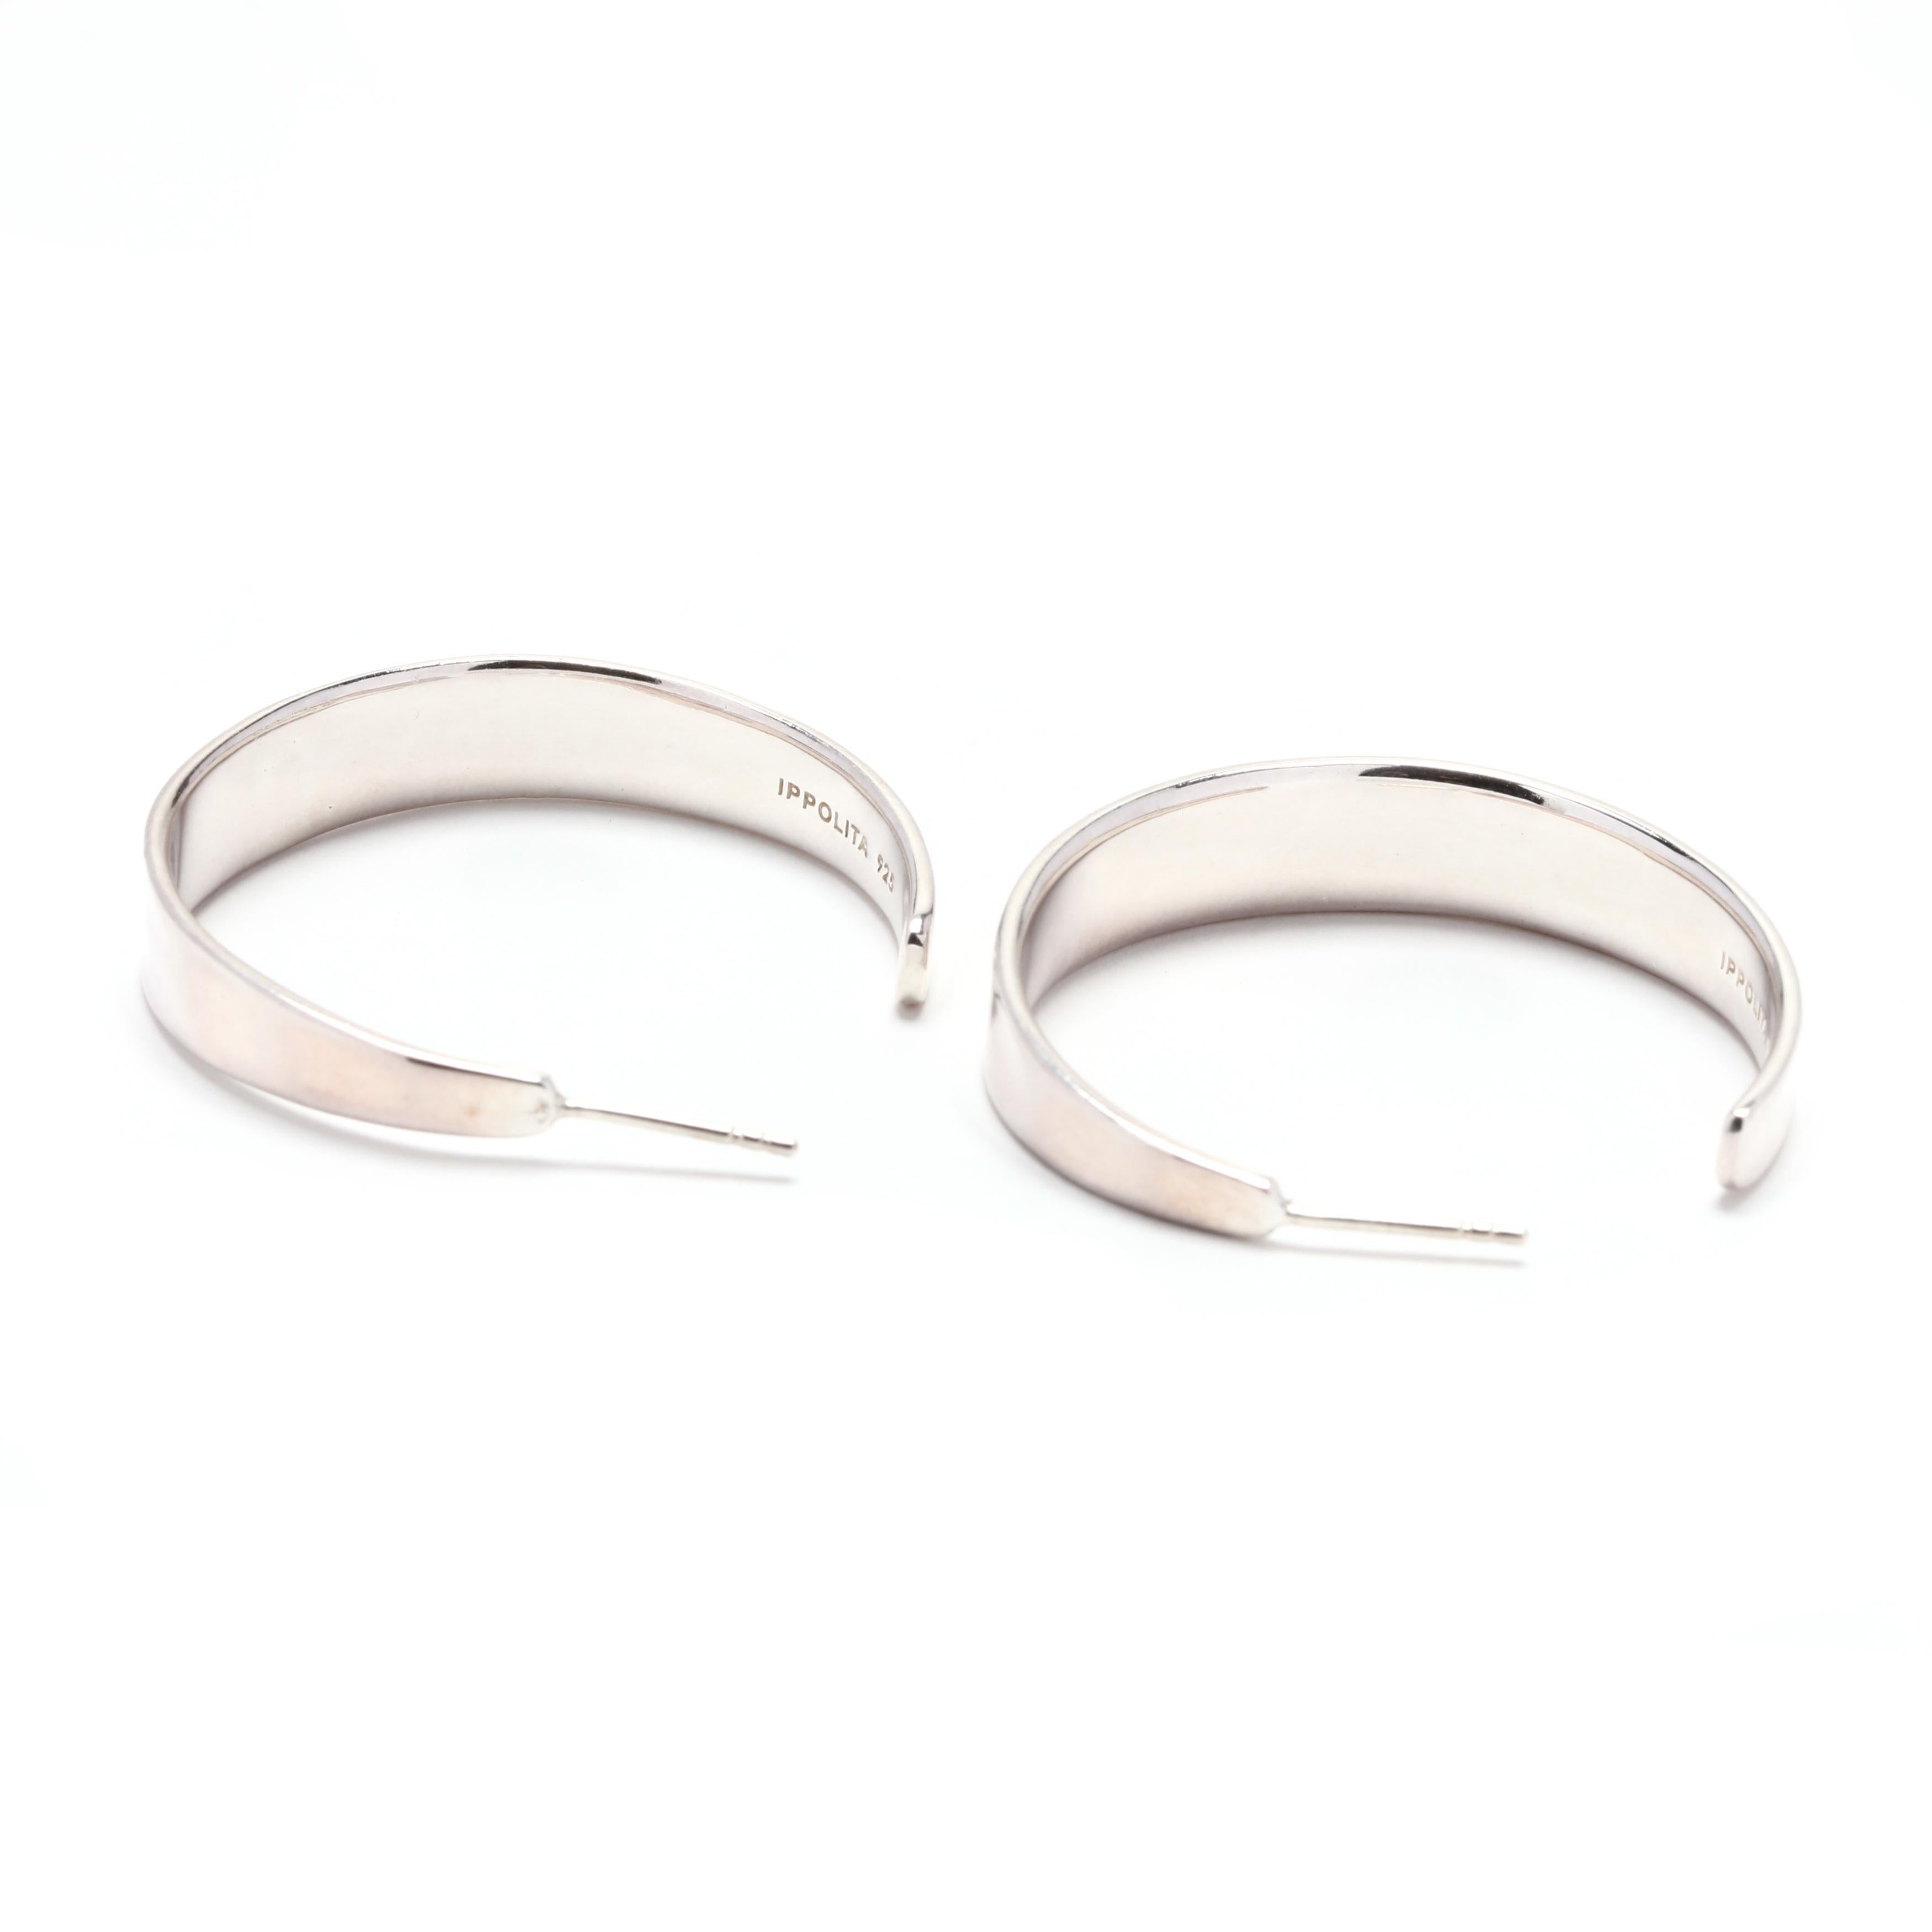 A pair of Ippolita sterling silver tapered hoop earrings. These earrings feature a faceted, concave tapered design with pierced butterfly earring backs.



Length: 1 3/8 in.



Width: 7.75 mm



Weight: 13.7 grams